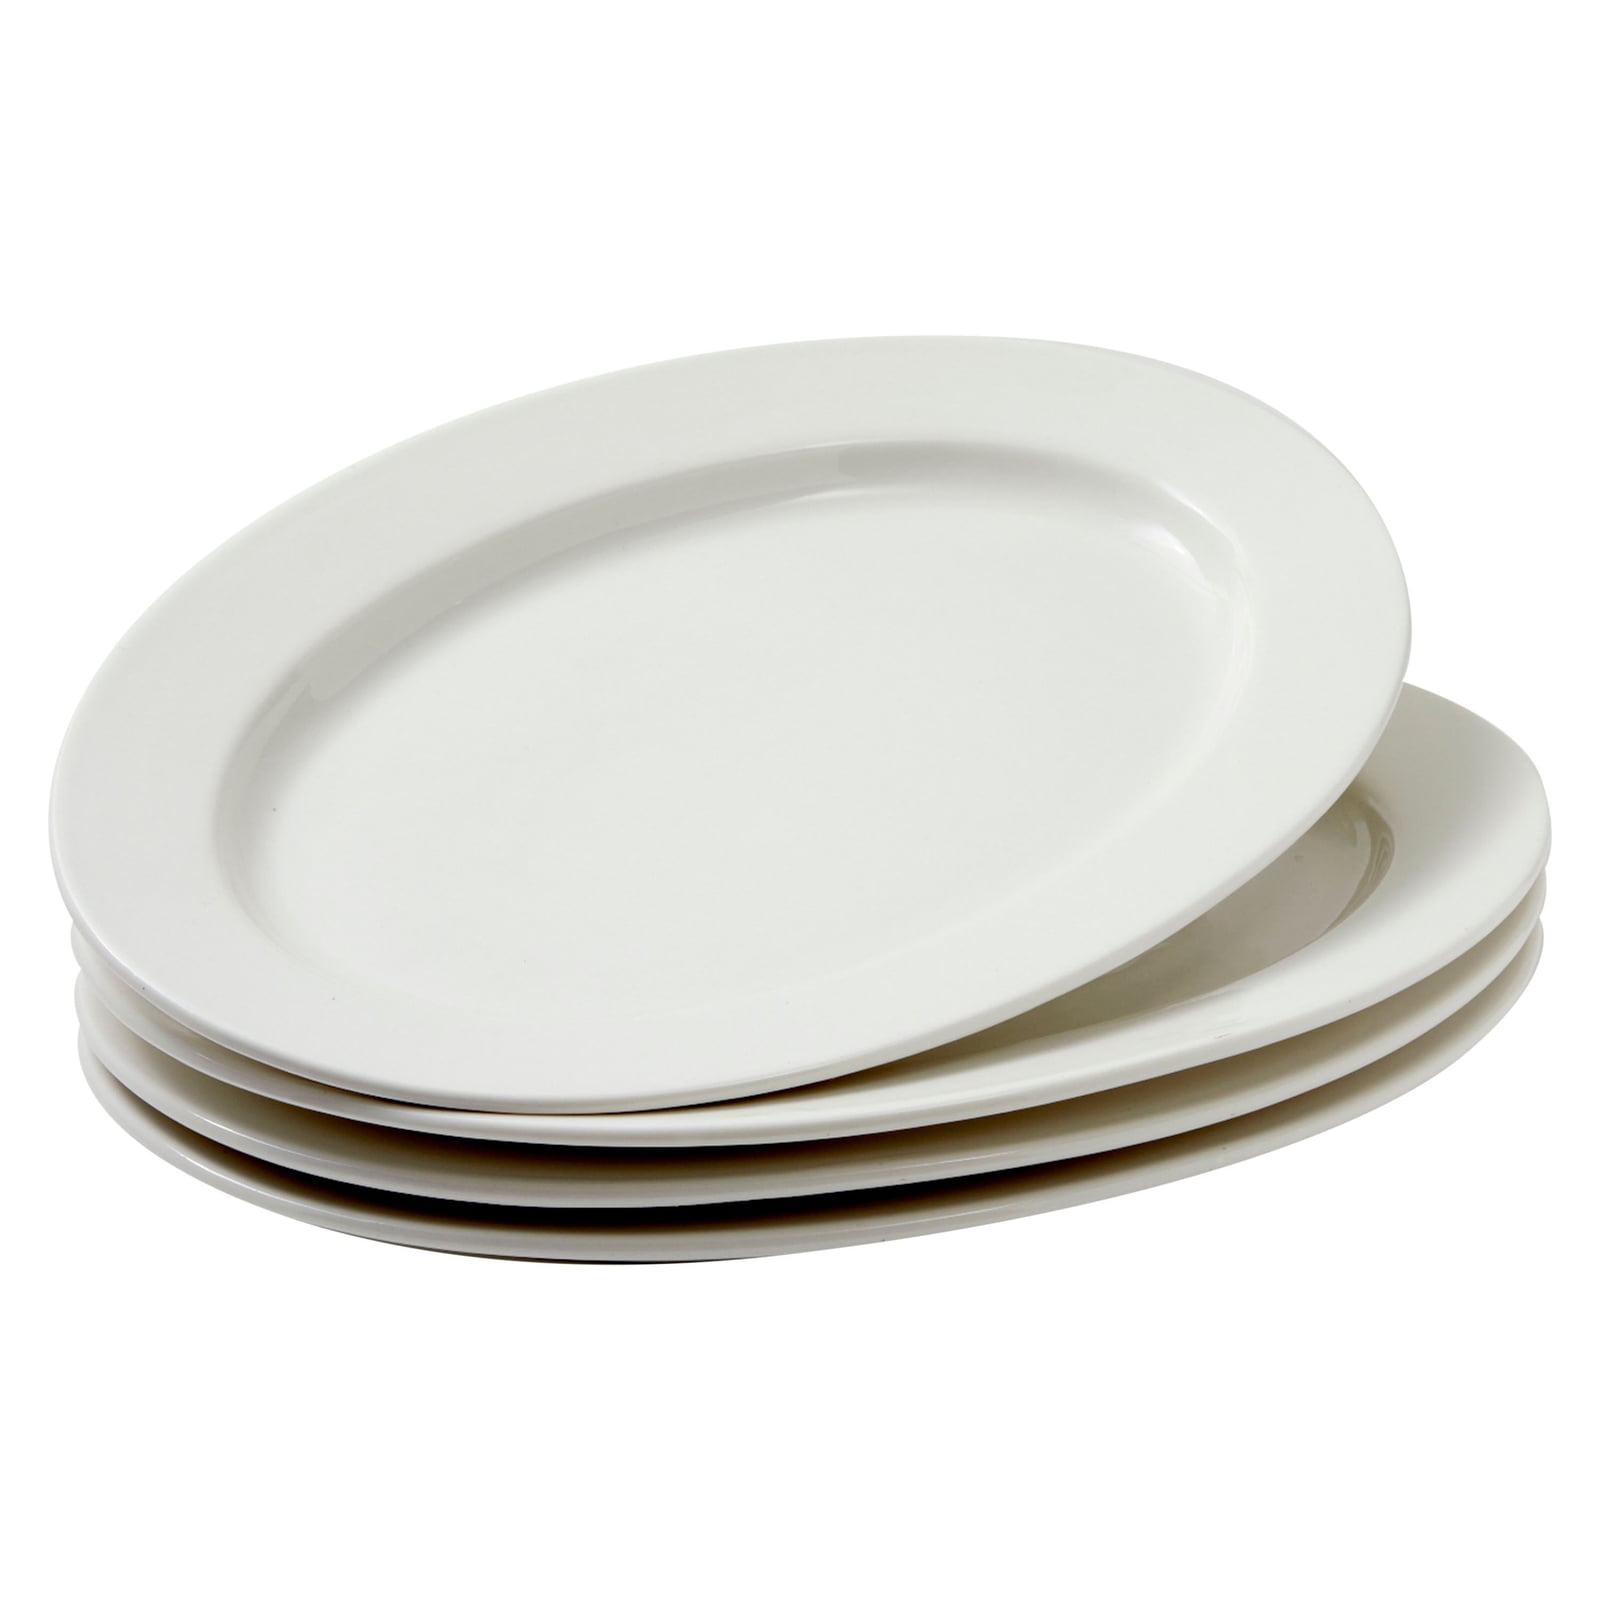 4 Pieces XL Prometeo Serveware Set in Brilliant White with 2x XL Oval Shaped Deep Serve Dishes and 2x Oversized Steak/Serving Platters 